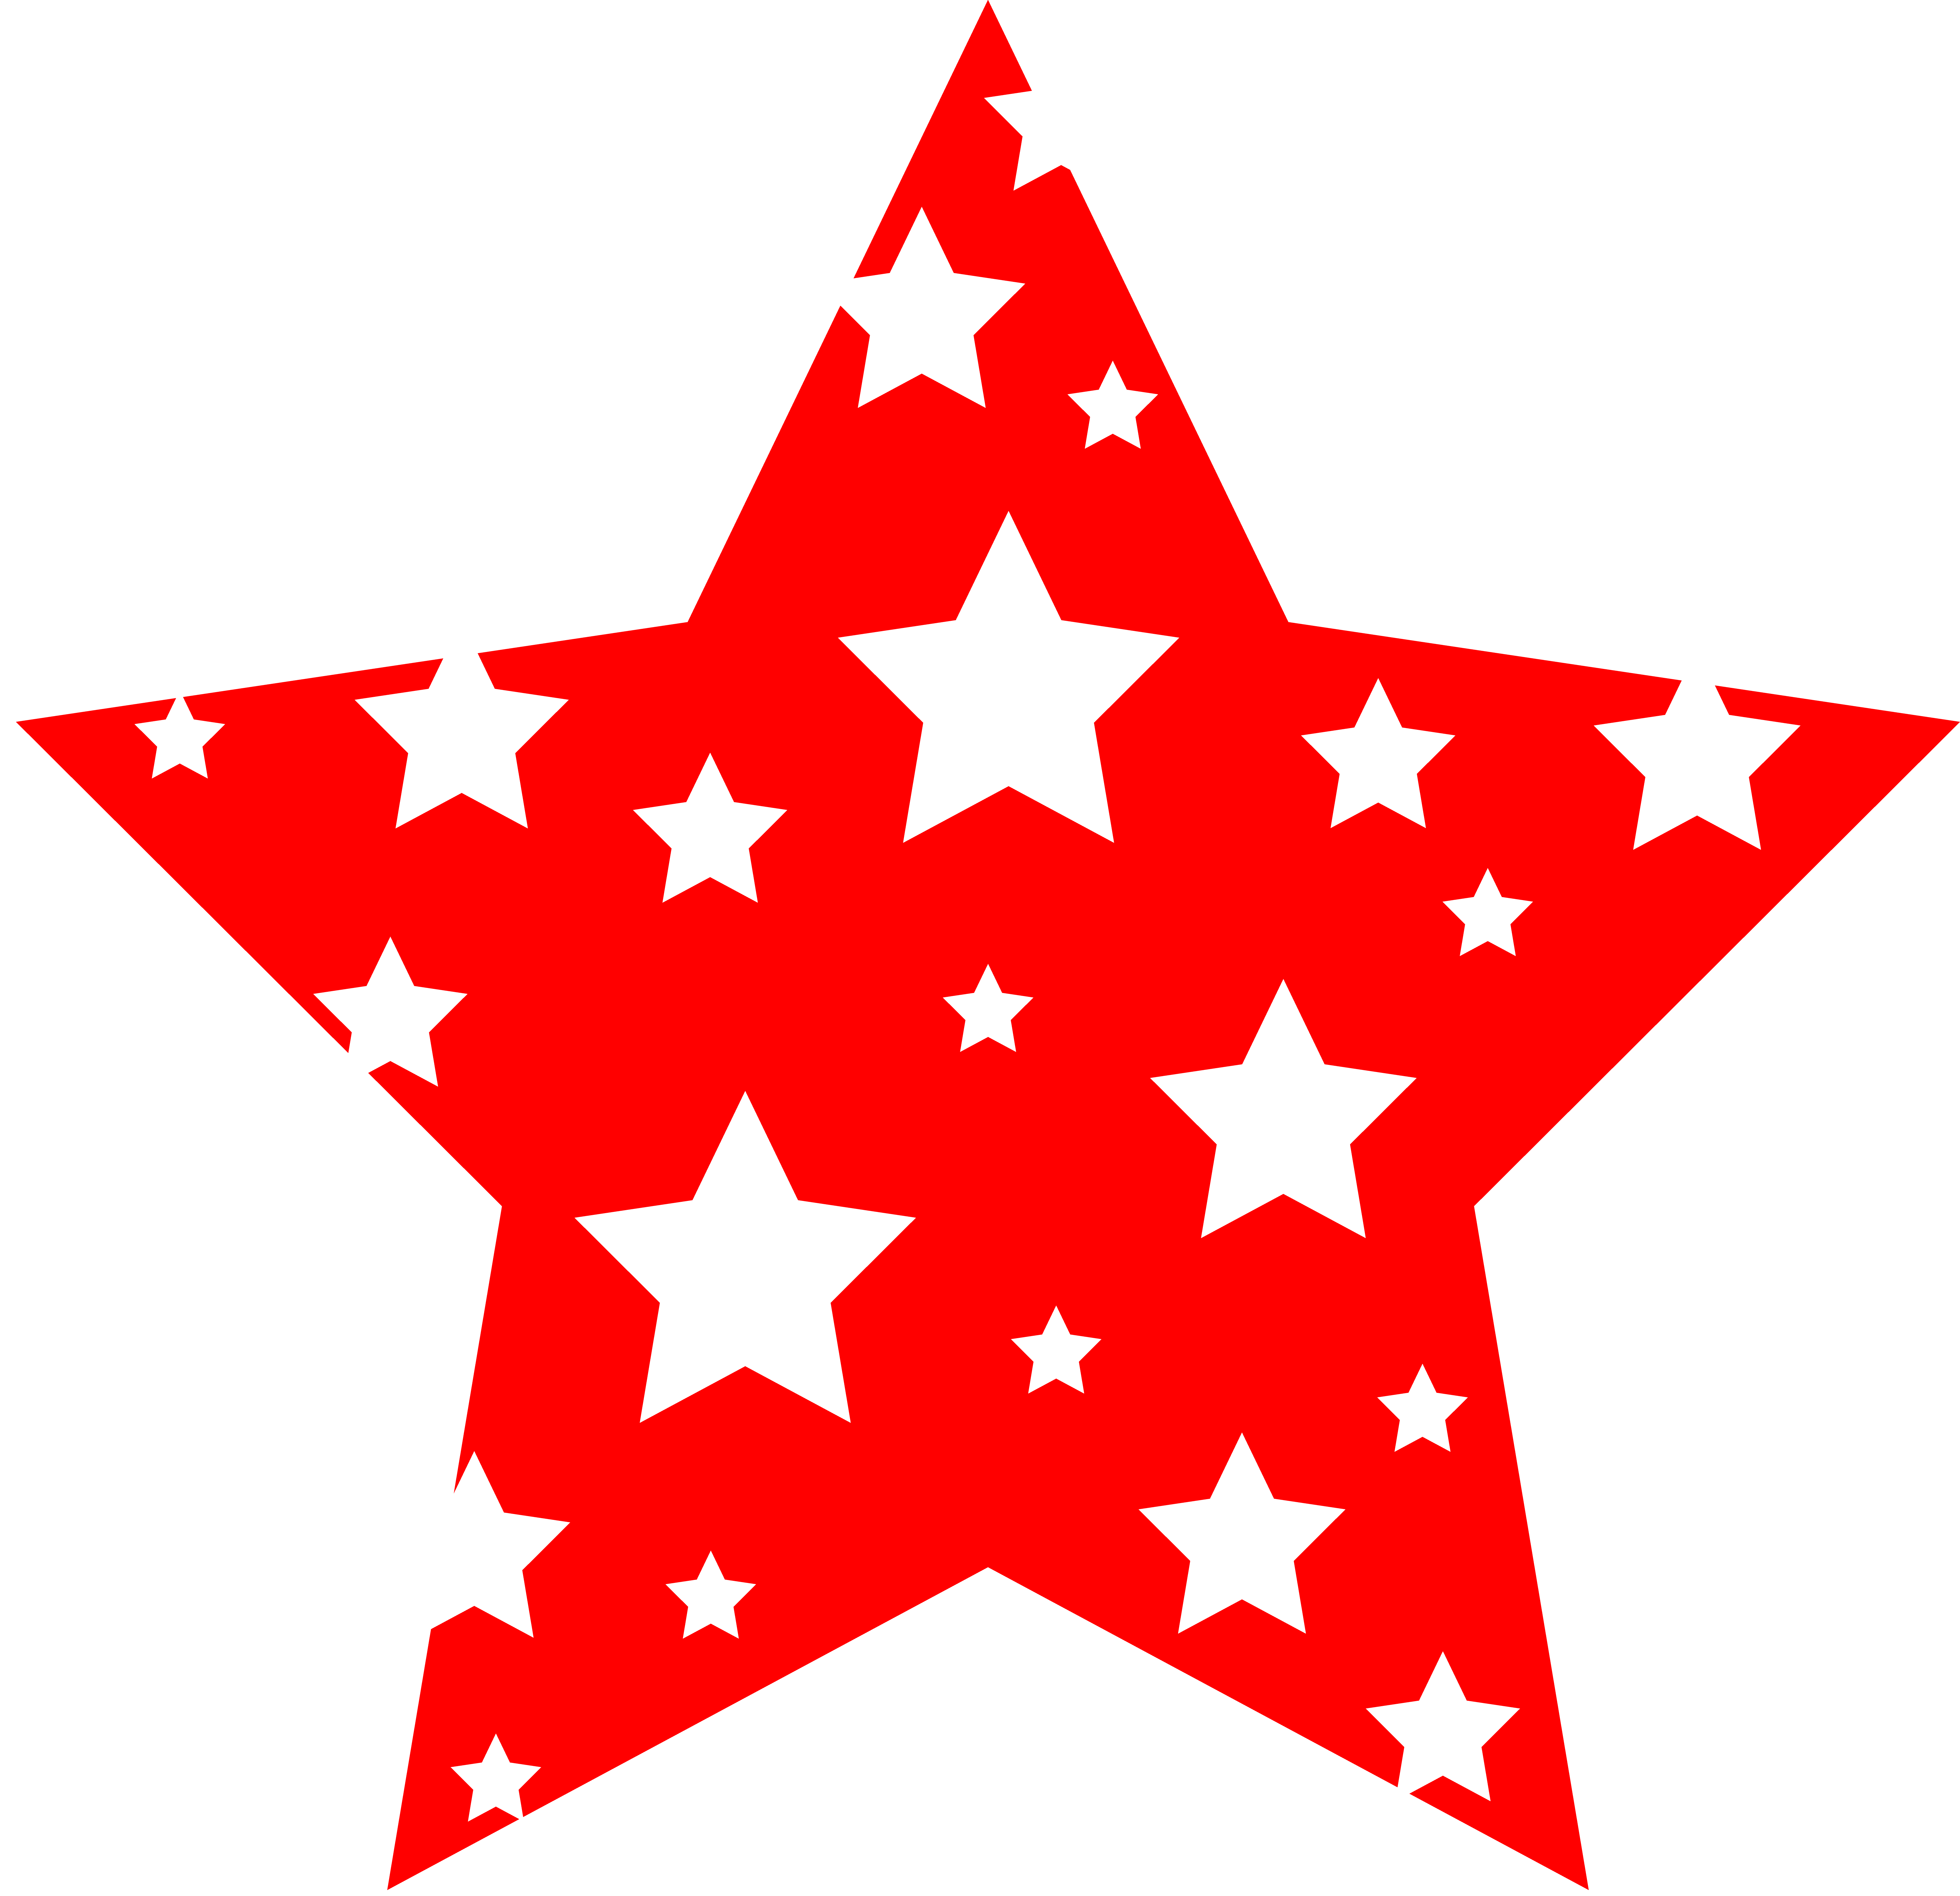 Red and White Starry Star - Free Clip Art